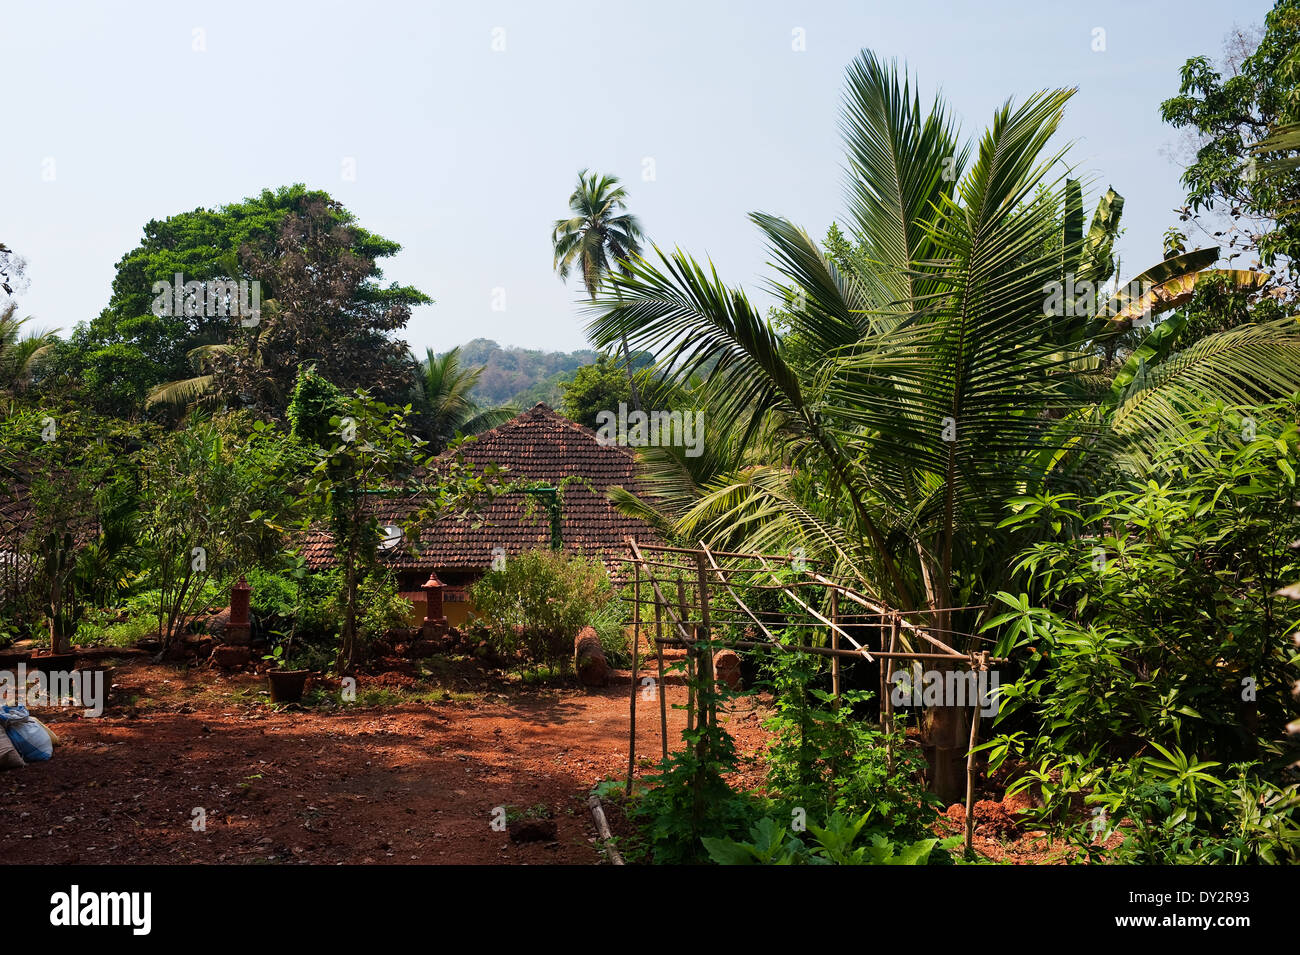 Roof tiles of Goan home and climbing frame for plants Stock Photo